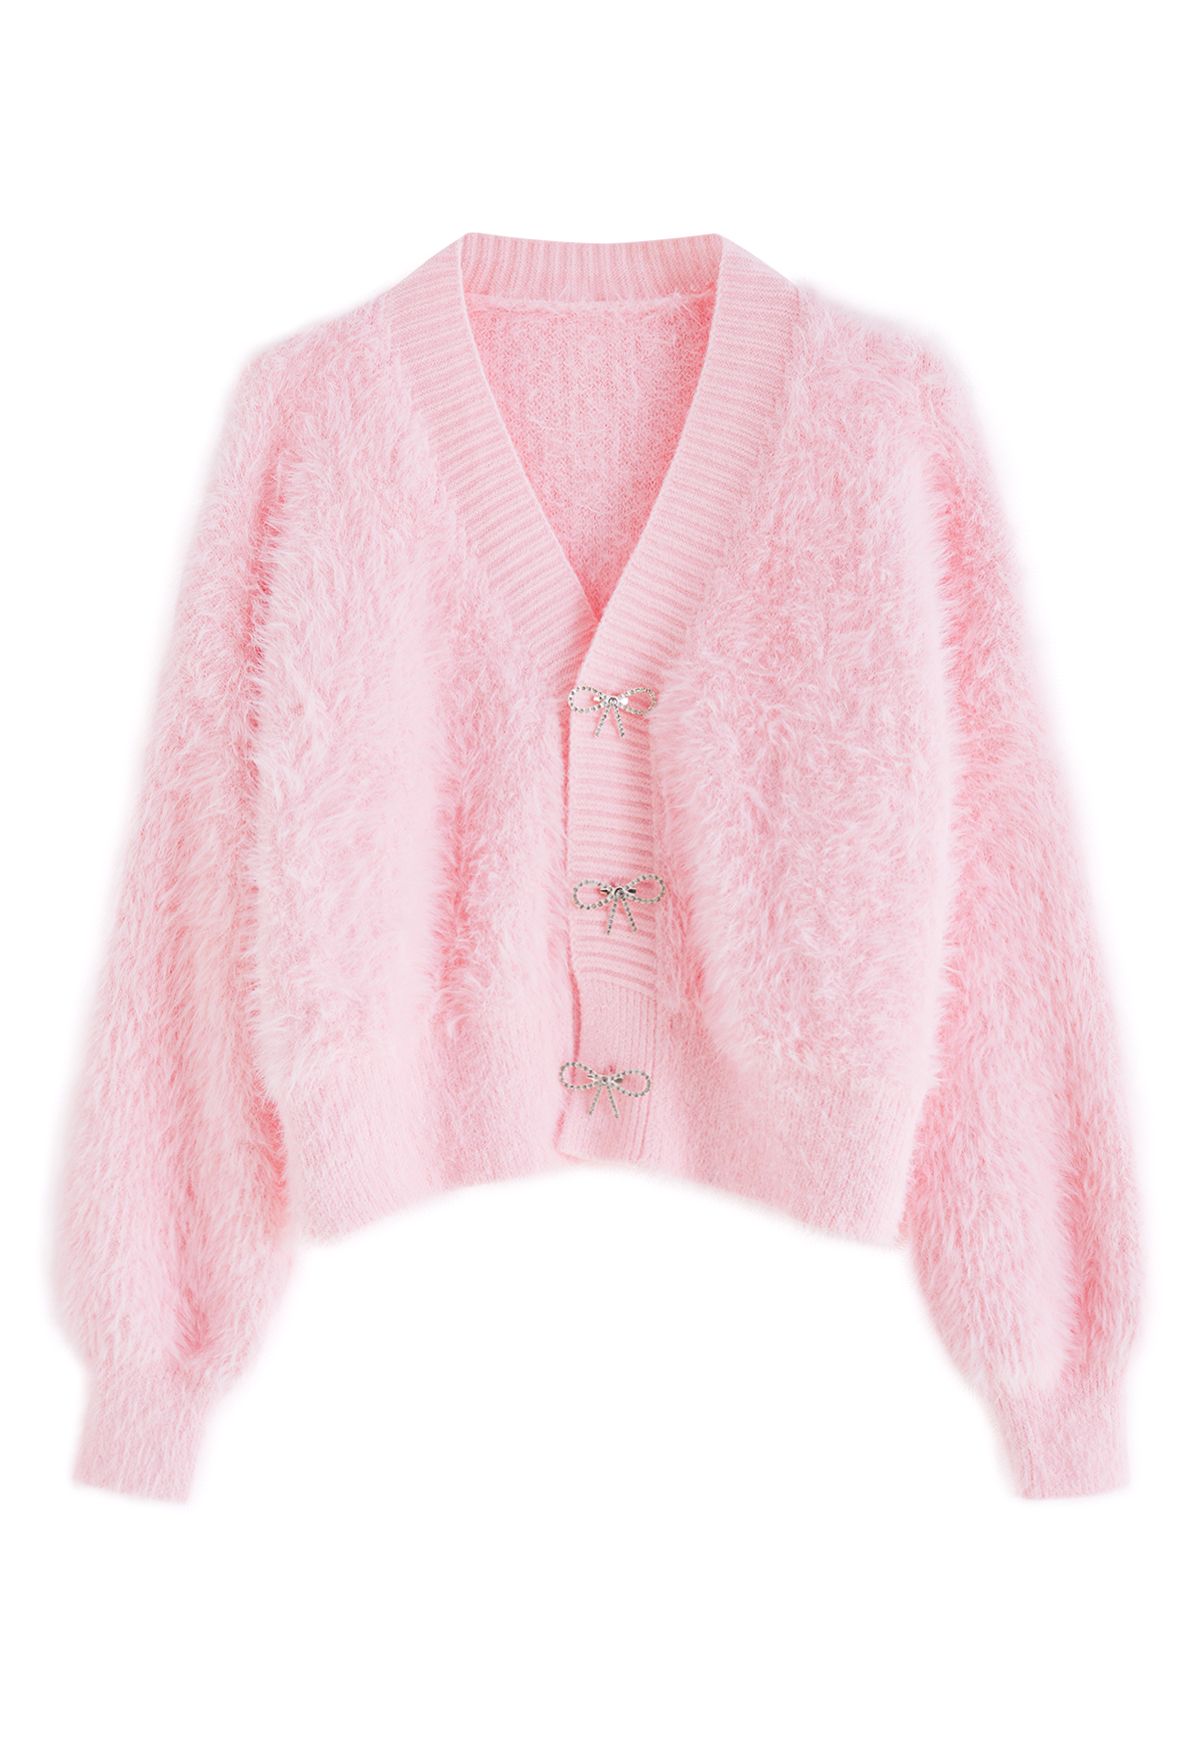 Bowknot Brooch Fuzzy Knit Cardigan in Pink - Retro, Indie and